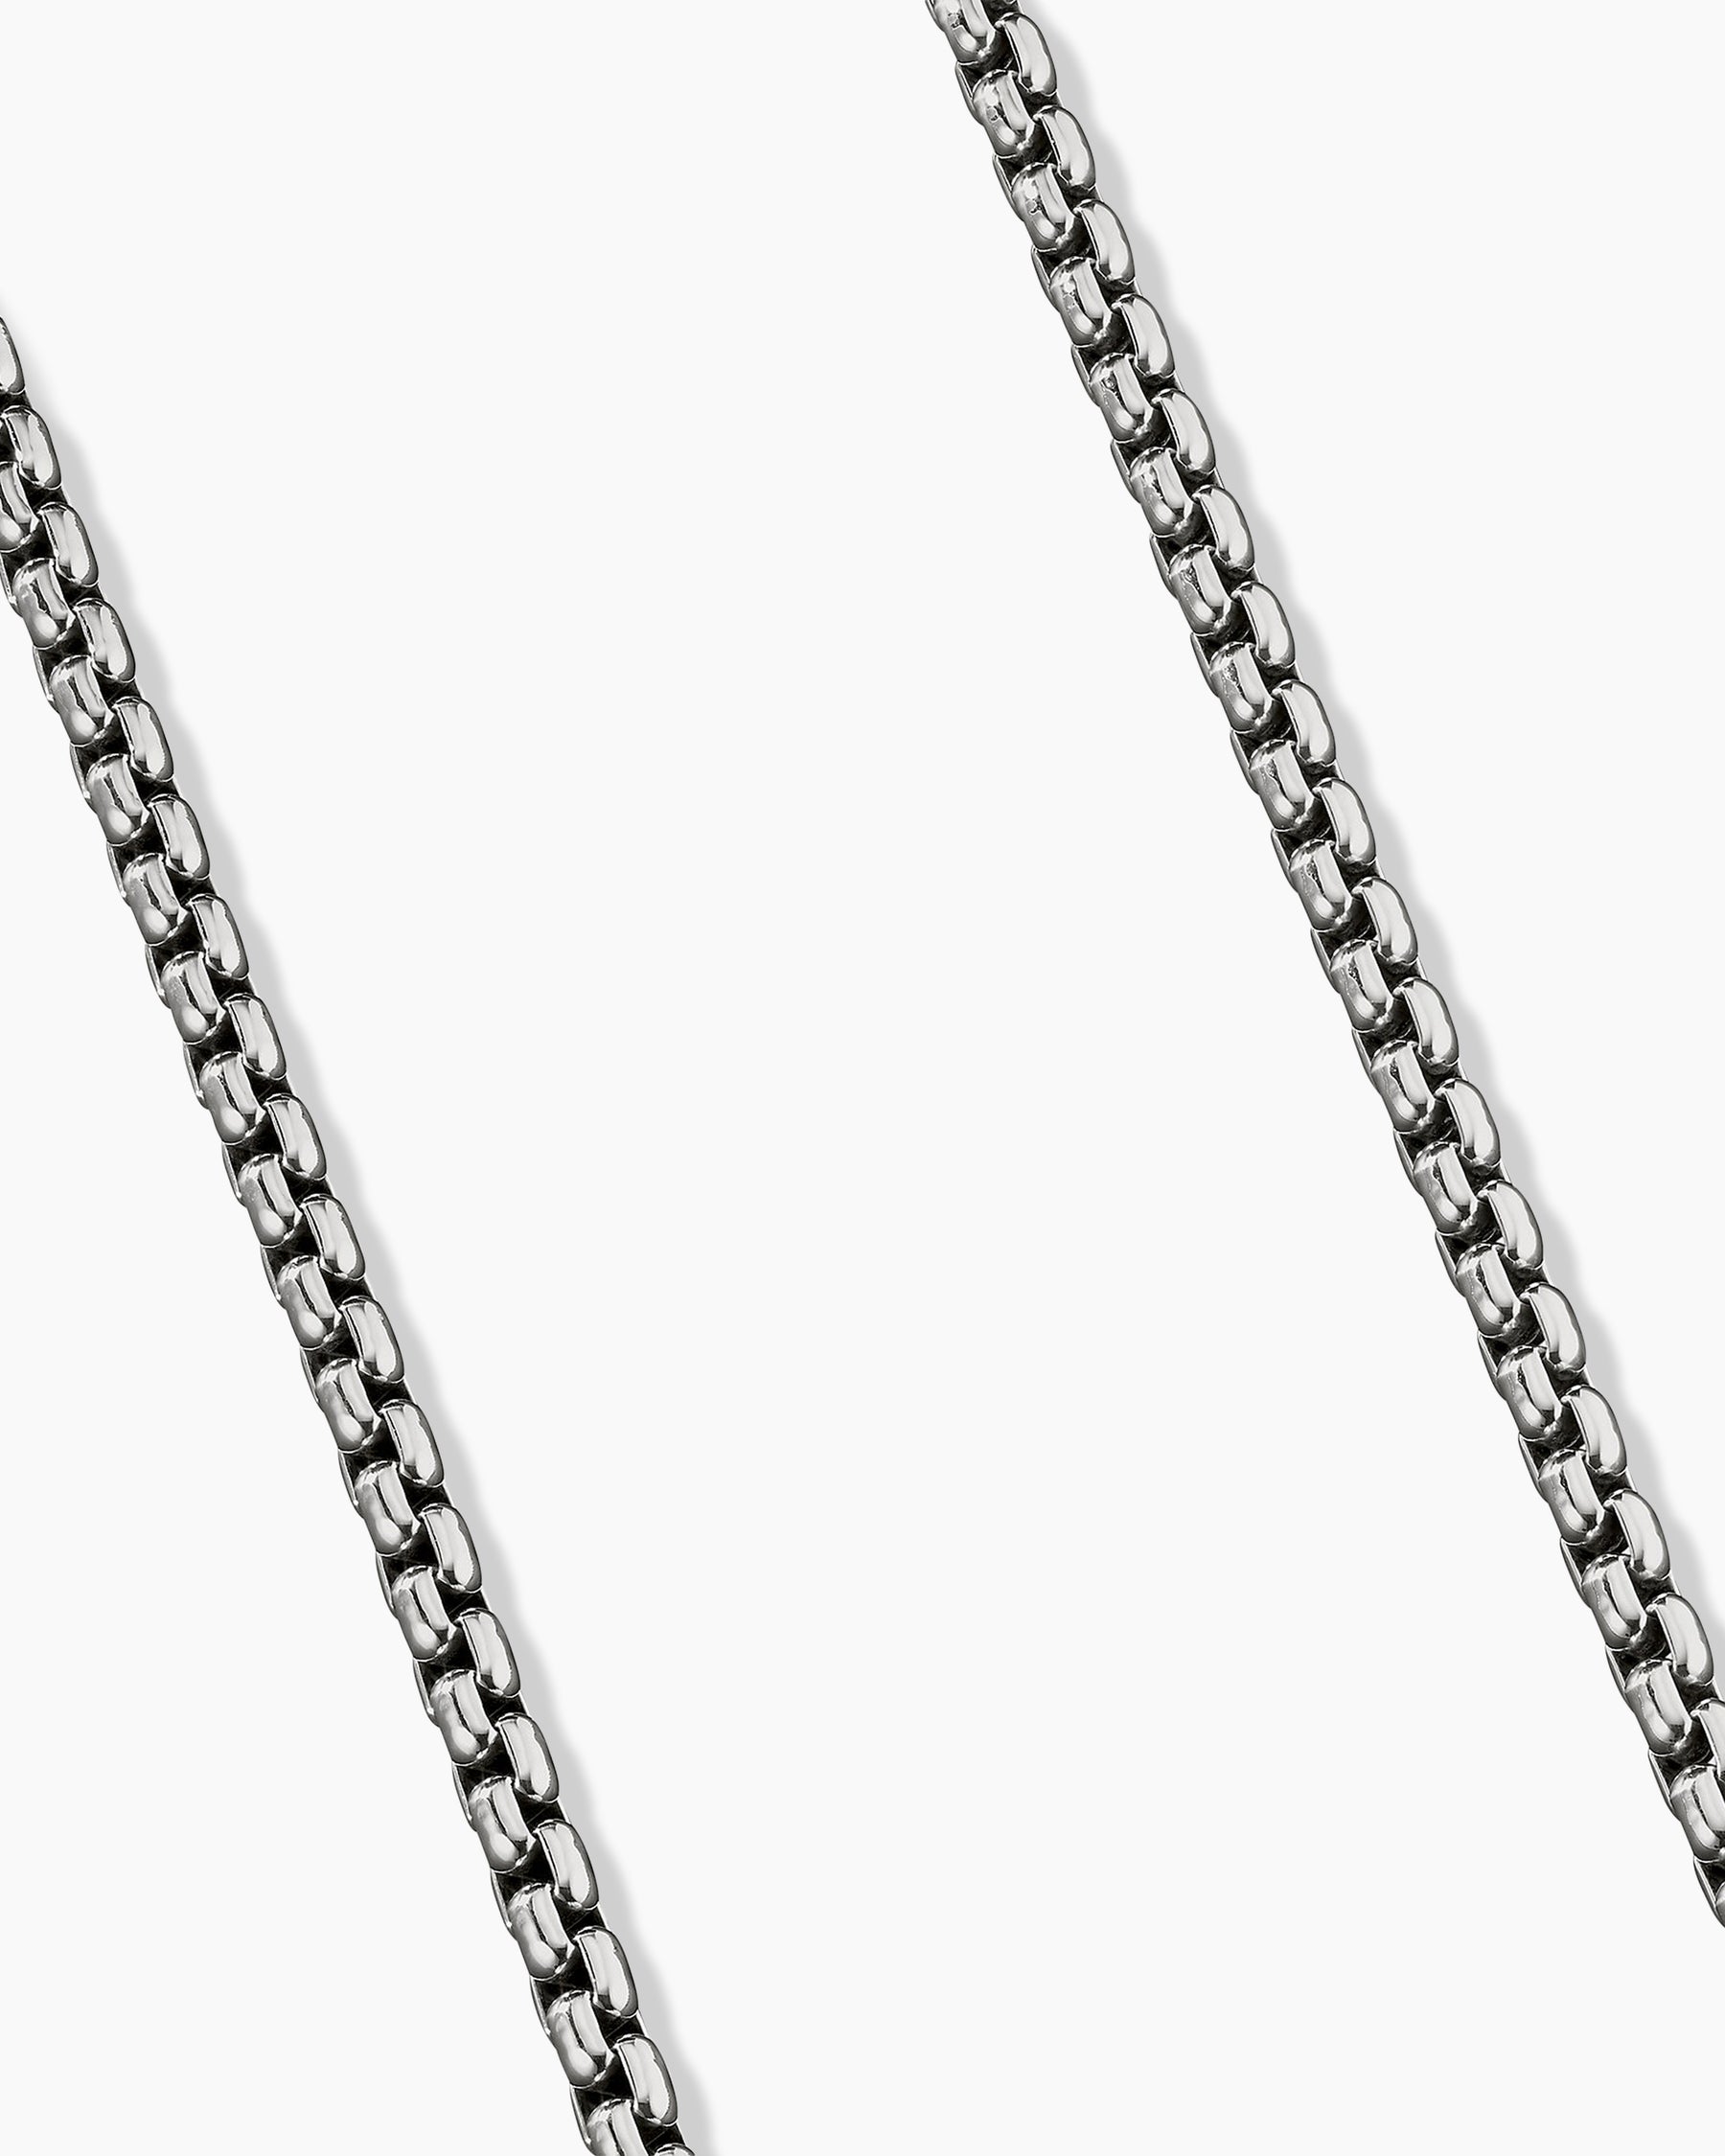 David Yurman Stainless Steel & Sterling Silver Box Chain Necklace, 22